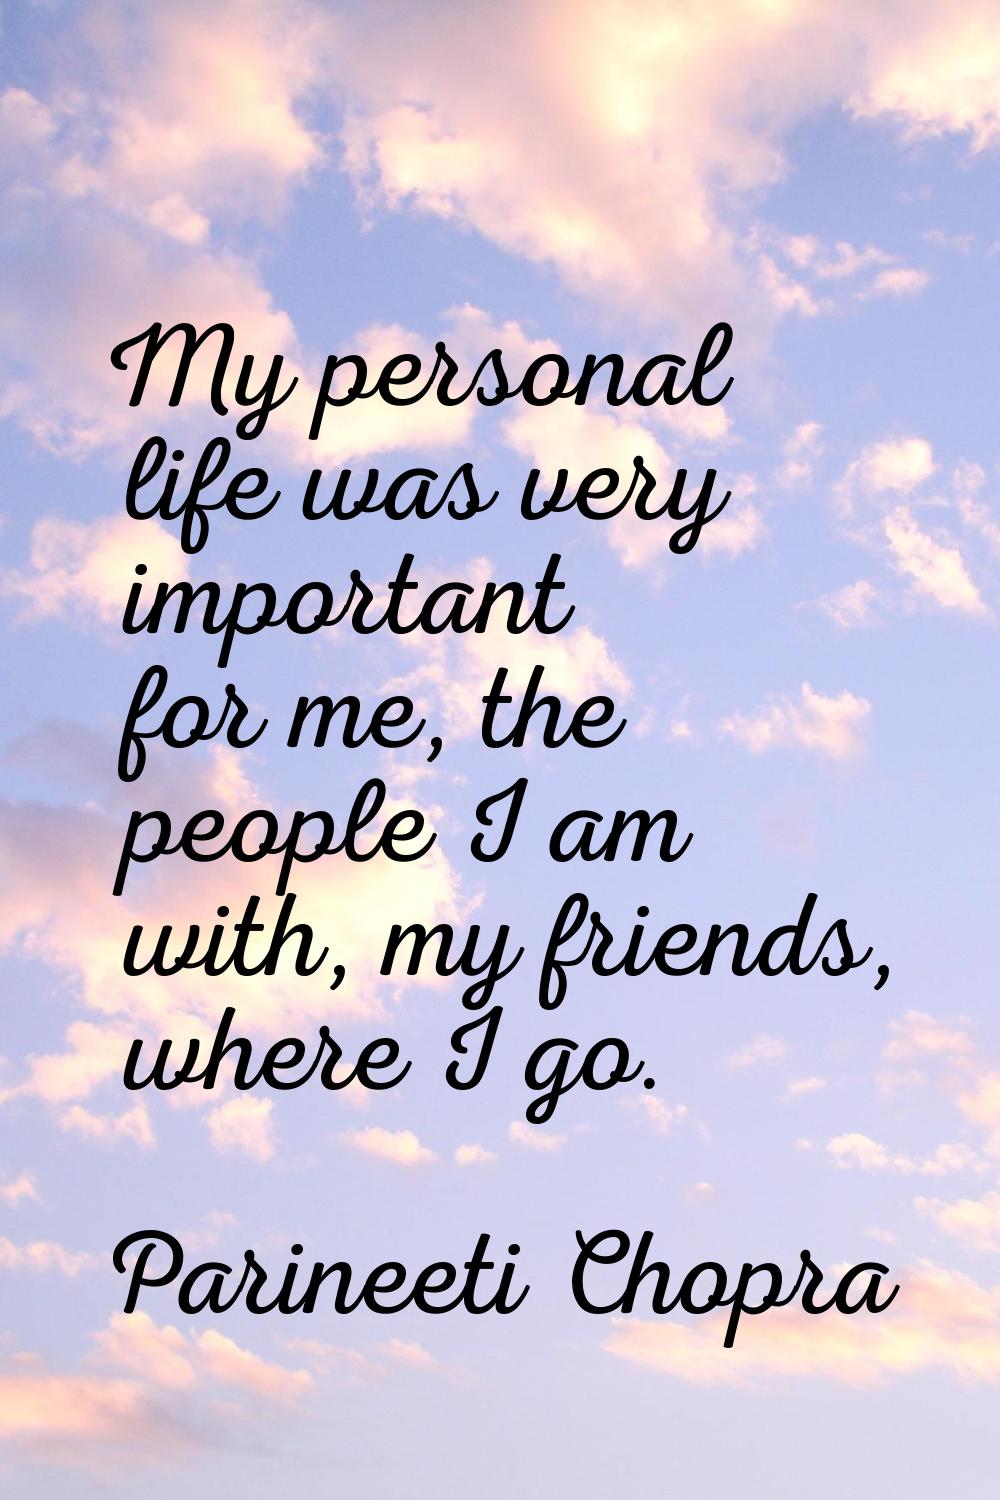 My personal life was very important for me, the people I am with, my friends, where I go.